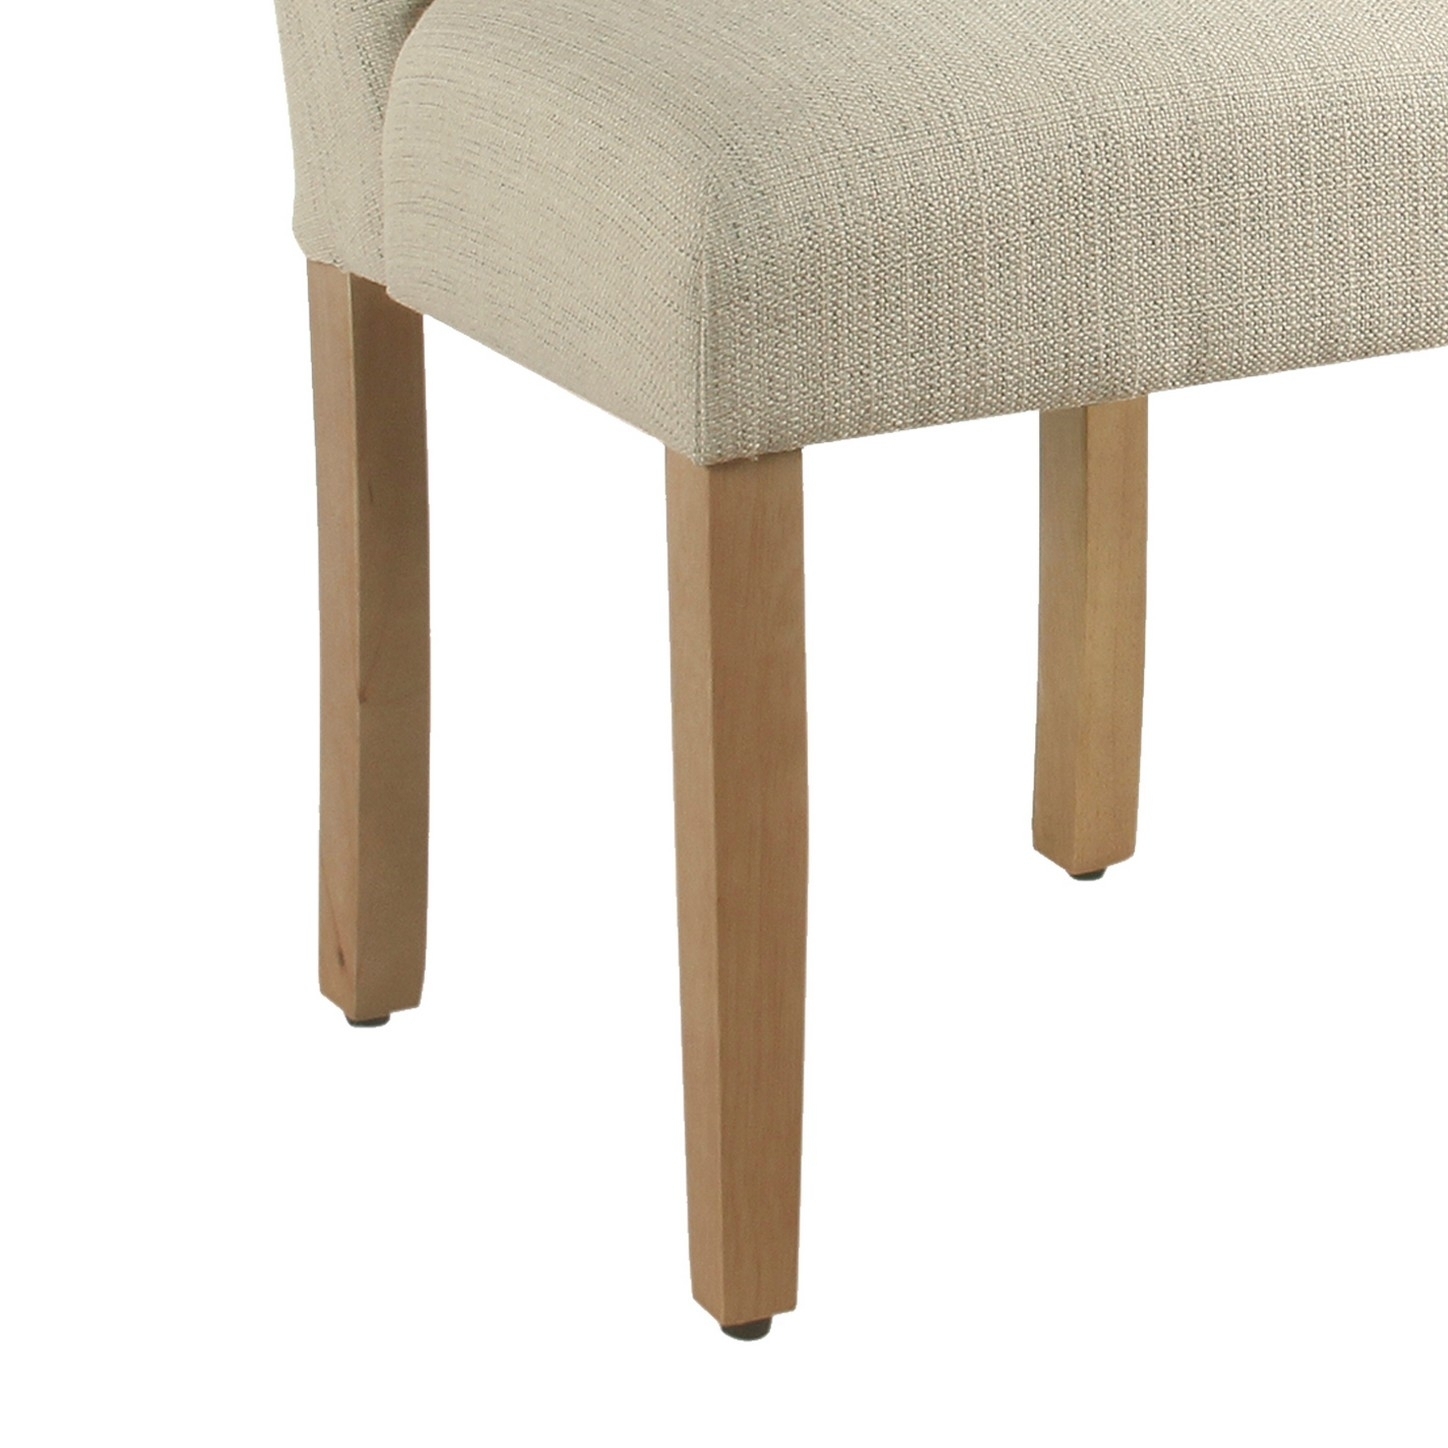 Fabric Upholstered Wooden Dining Chair, Angled Curved Backrest, Beige- Saltoro Sherpi